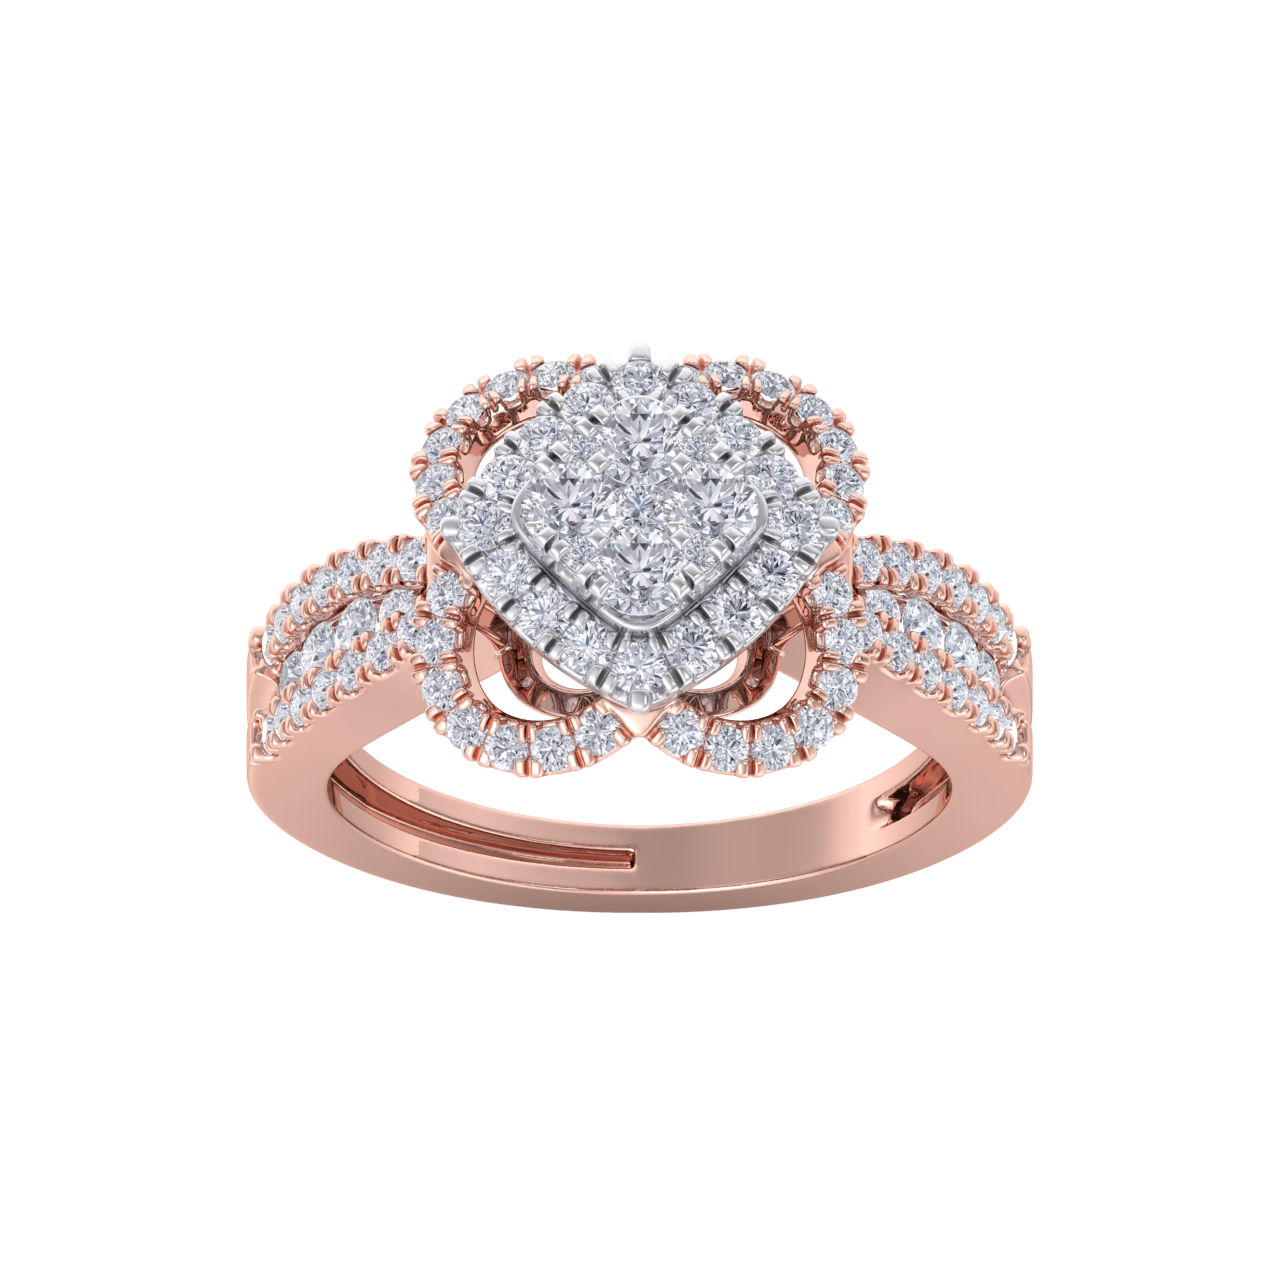 Diamond ring in rose gold with white diamonds of 0.97 ct in weight